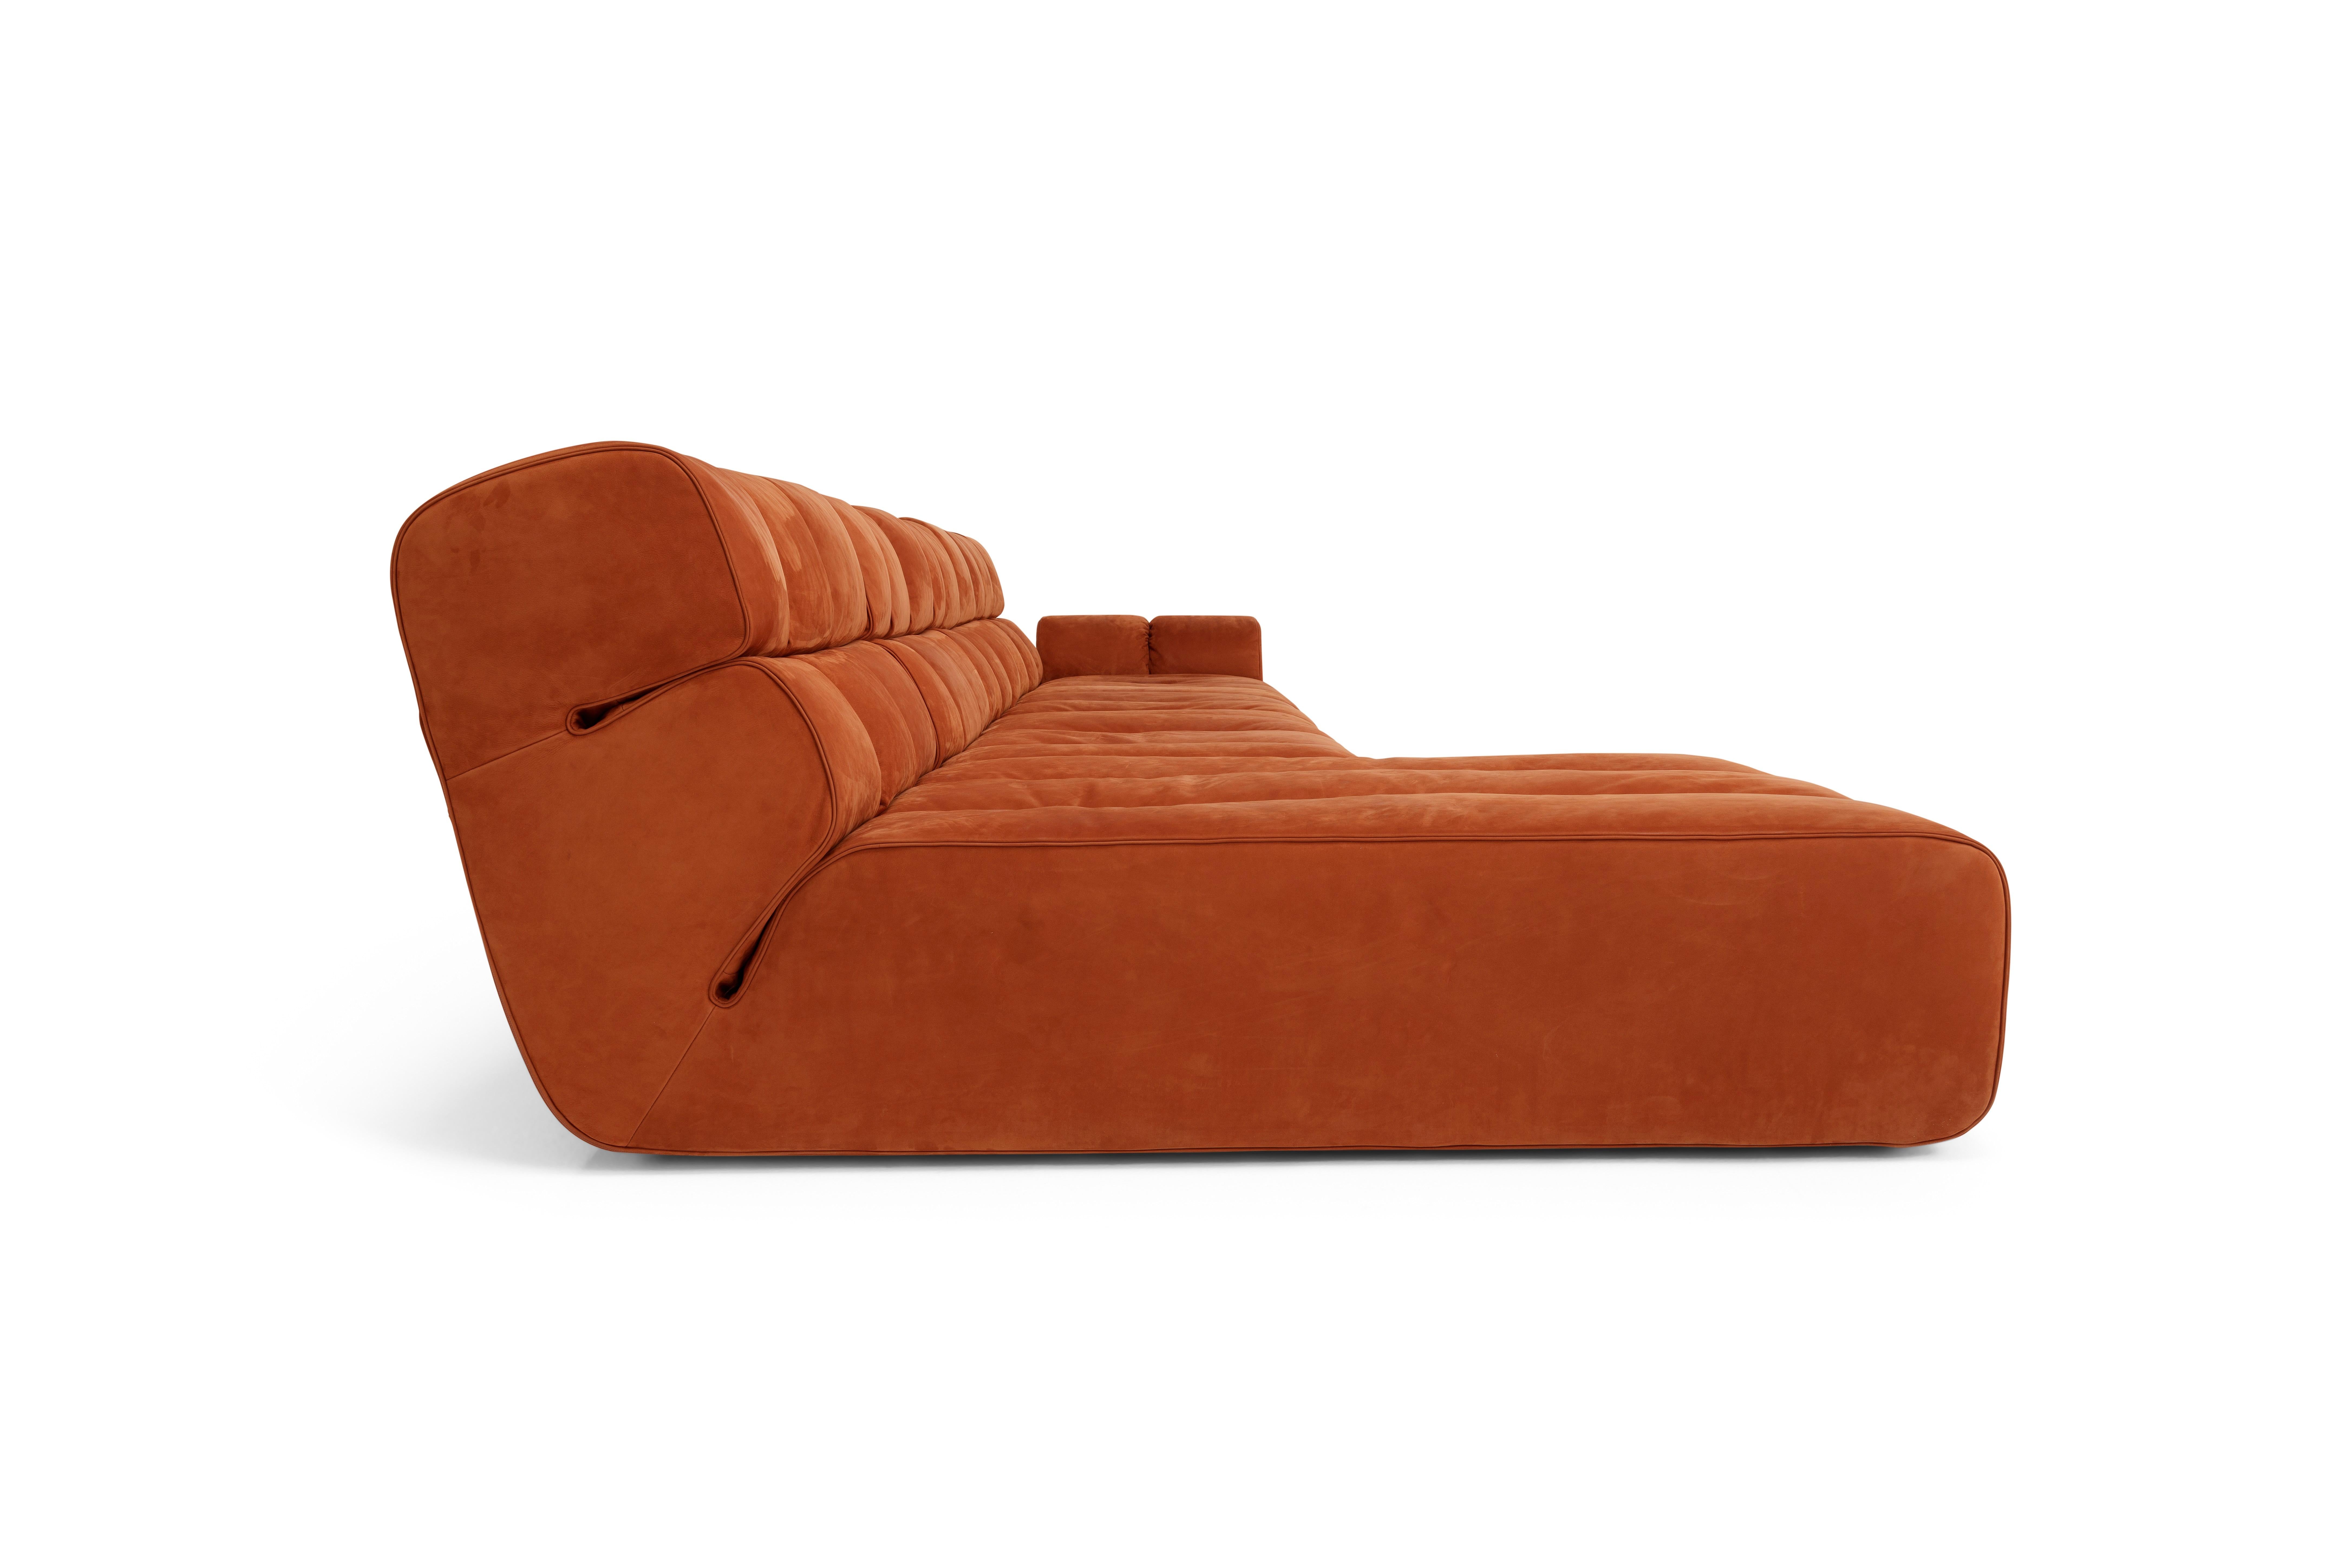 Contemporary Orange Sofa 'Palmo' by Amura Lab, Leather Nabuck 19 For Sale 7